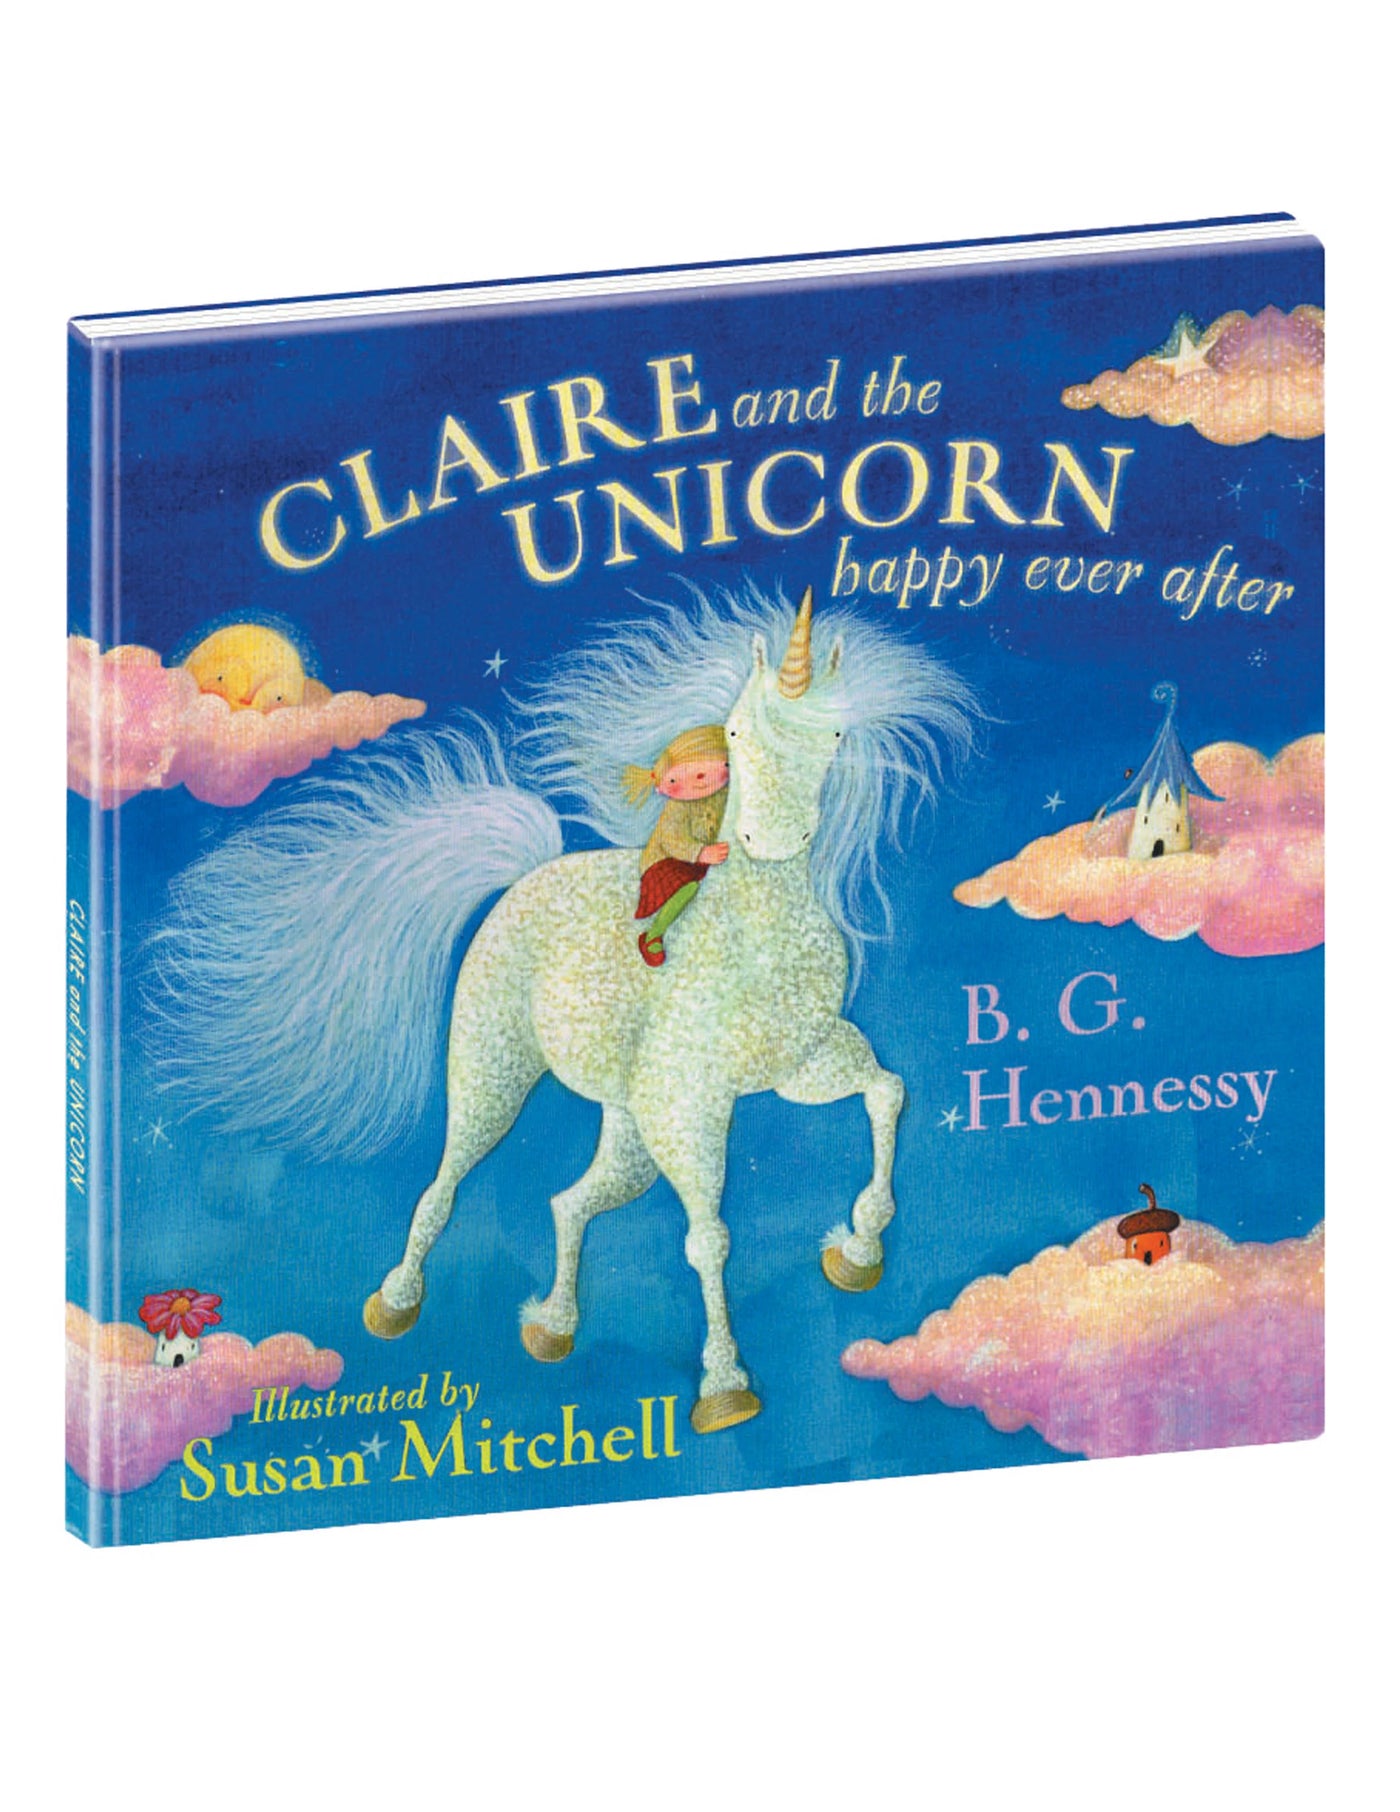 Clare and the Unicorn, Happy Ever After Hardcover Book